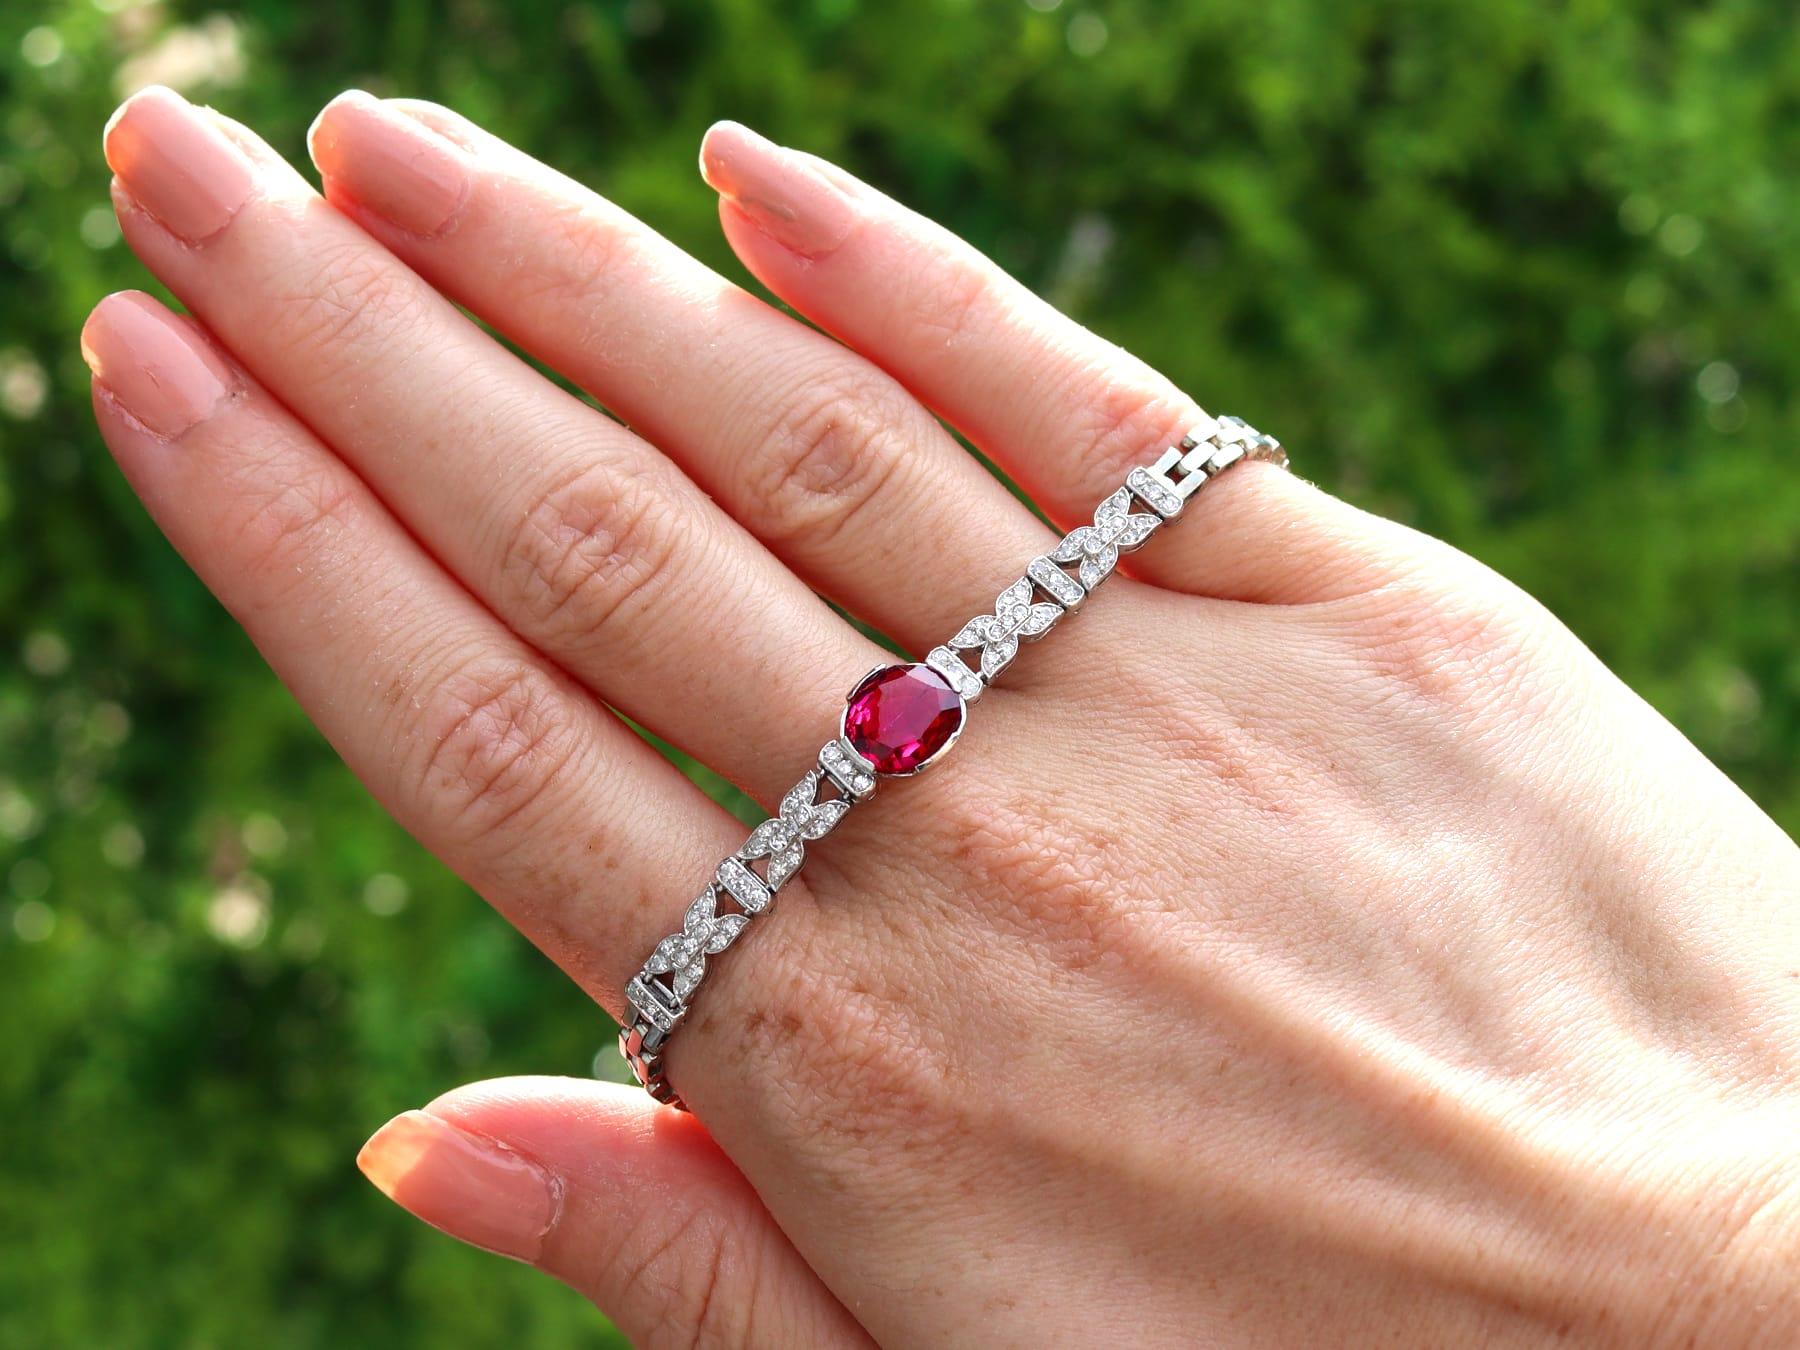 An impressive antique Swedish 2.27 carat garnet and 1.09 carat diamond, 18 karat white gold bracelet; part of our diverse antique jewelry and estate jewelry collections.

This stunning, fine and impressive bracelet has been crafted in 18k white